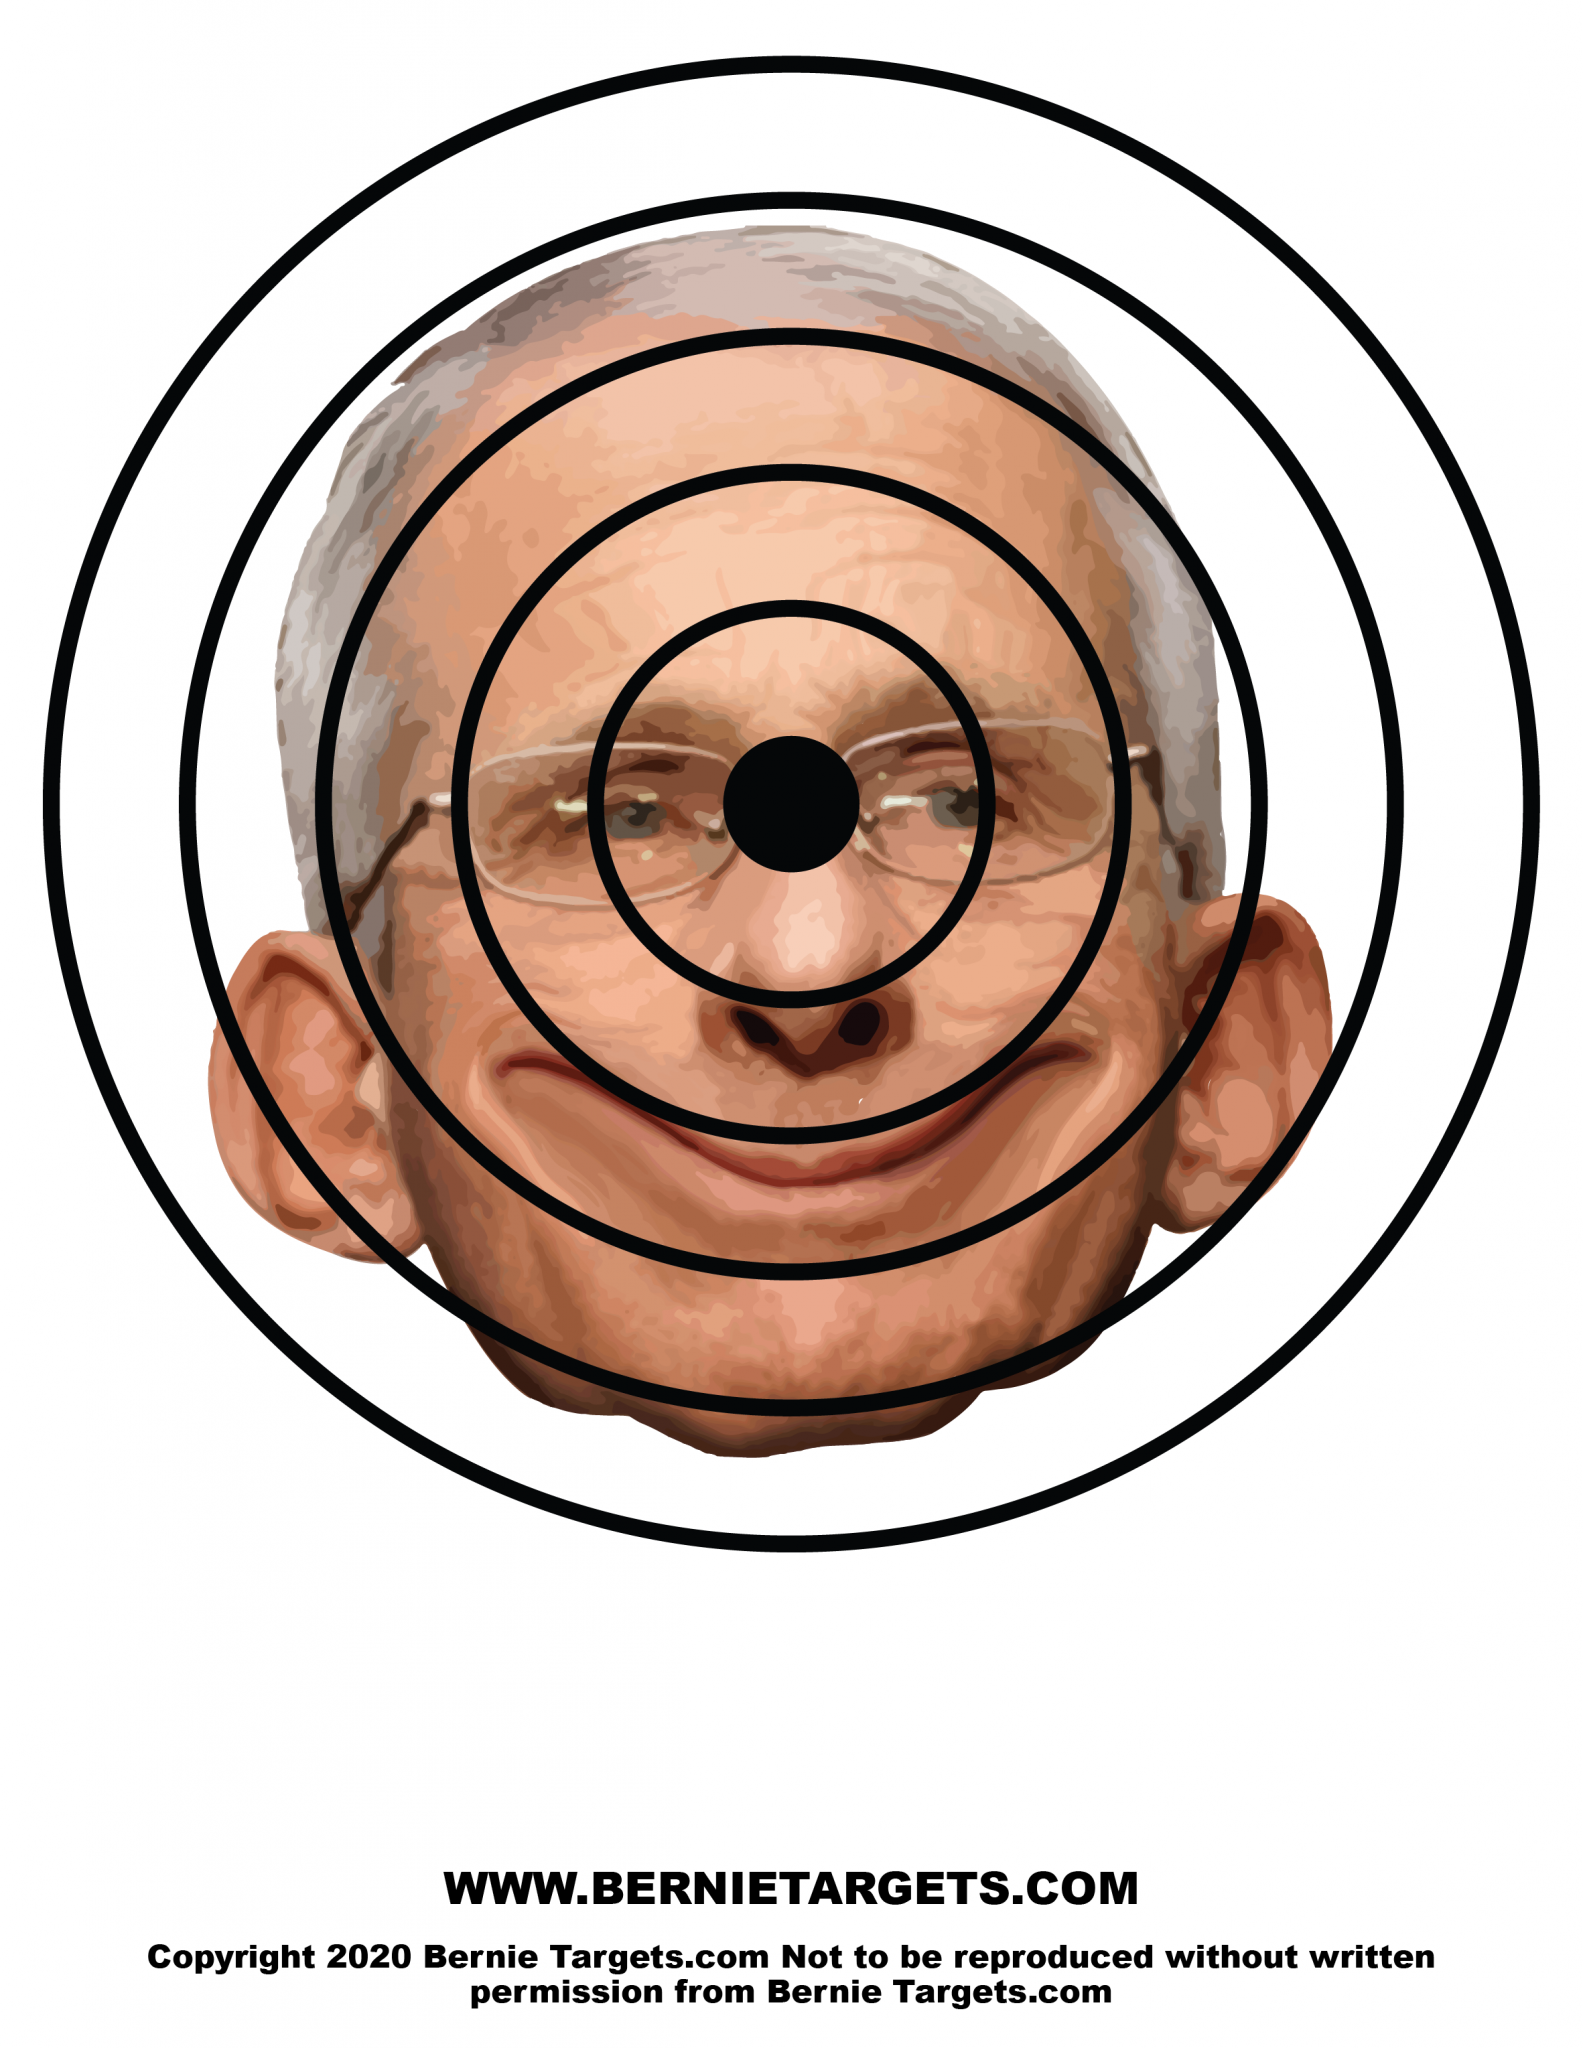 Dr. Anthony Fauci Shooting Targets – 5 Pack – Bernie Targets